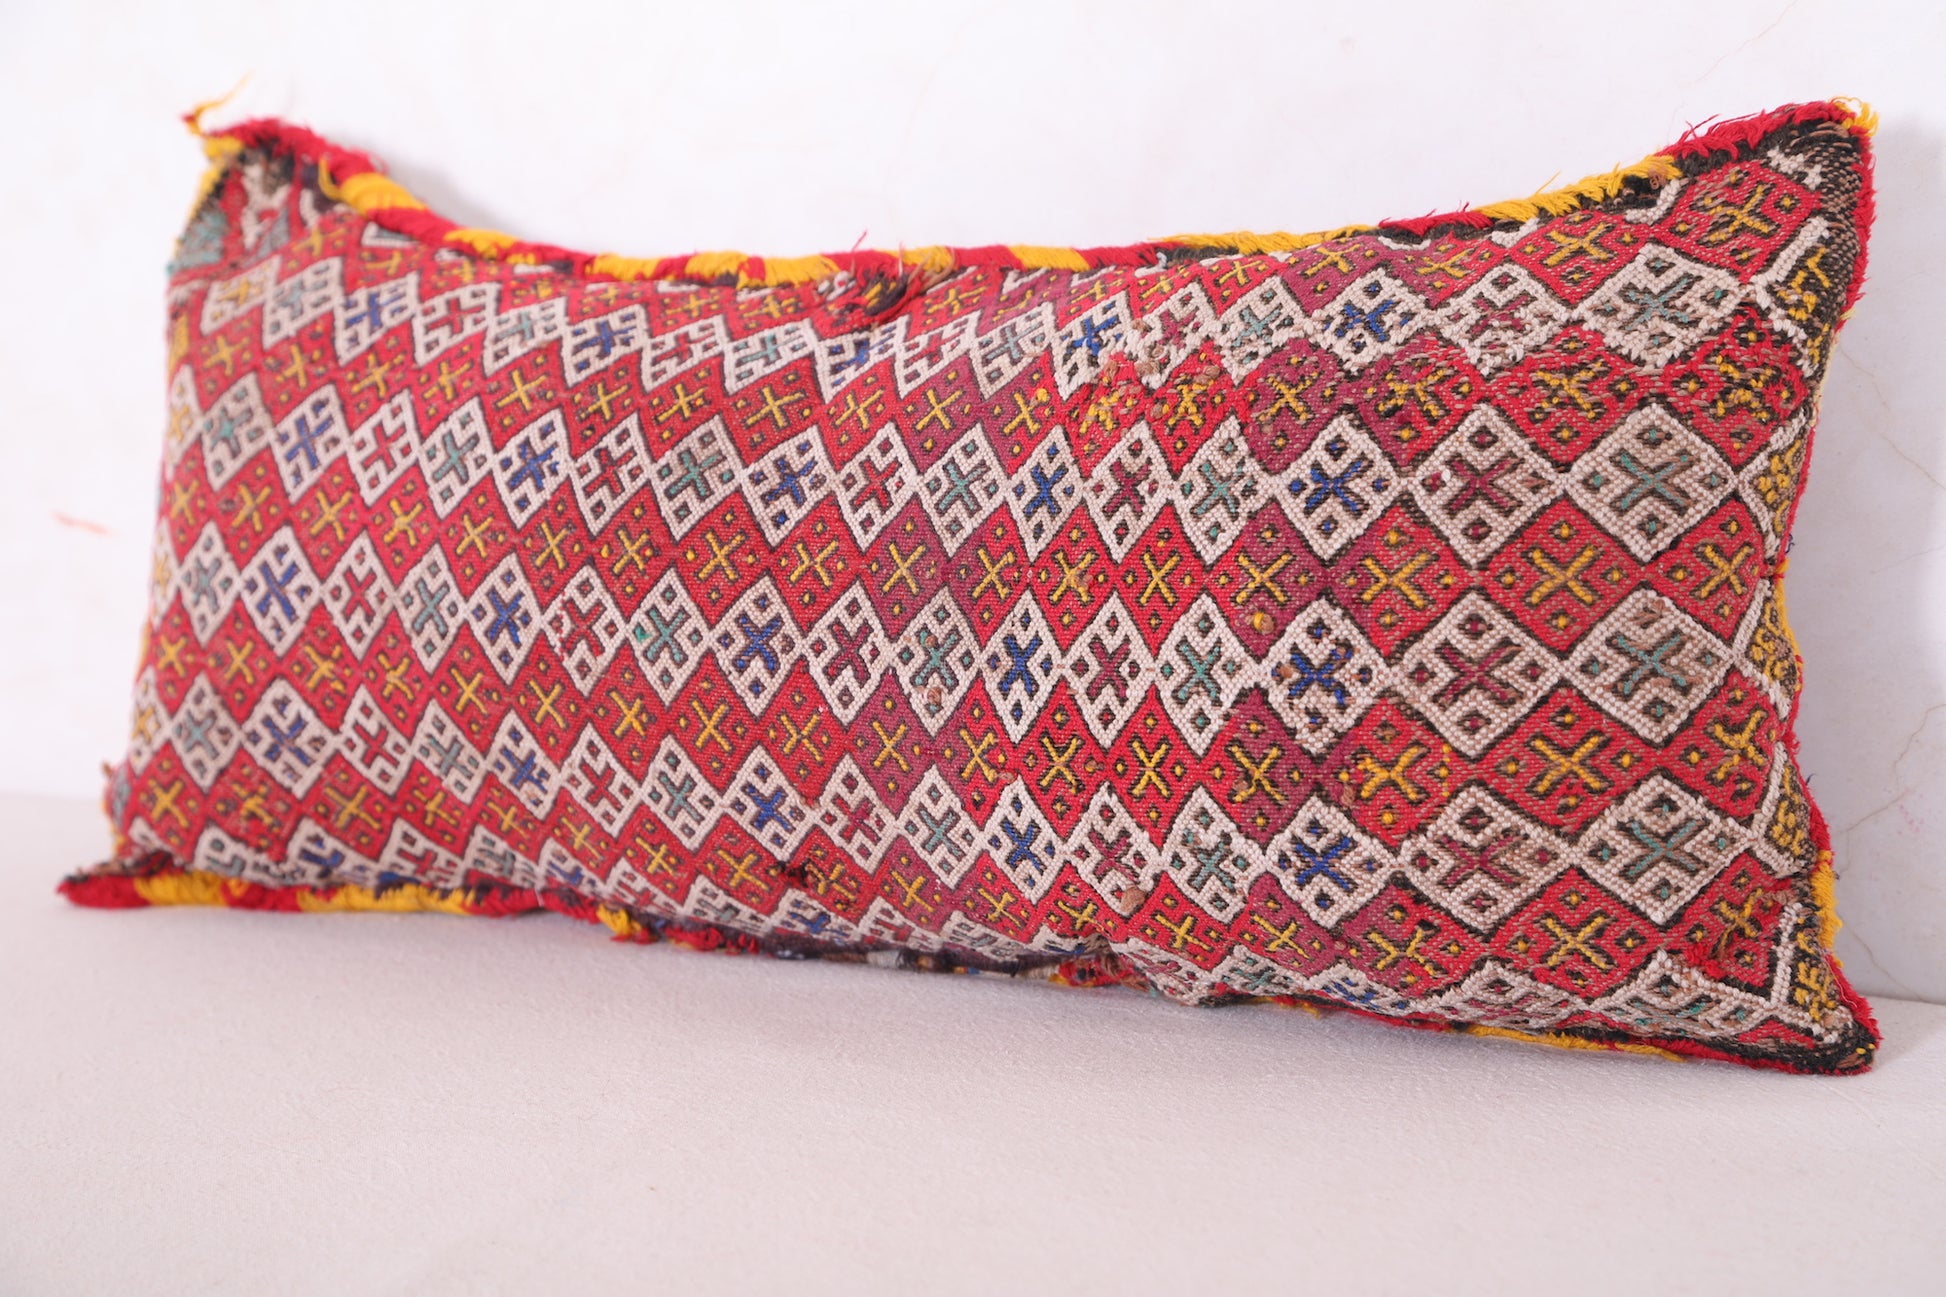 Long pillow 10.2 INCHES X 22 INCHES